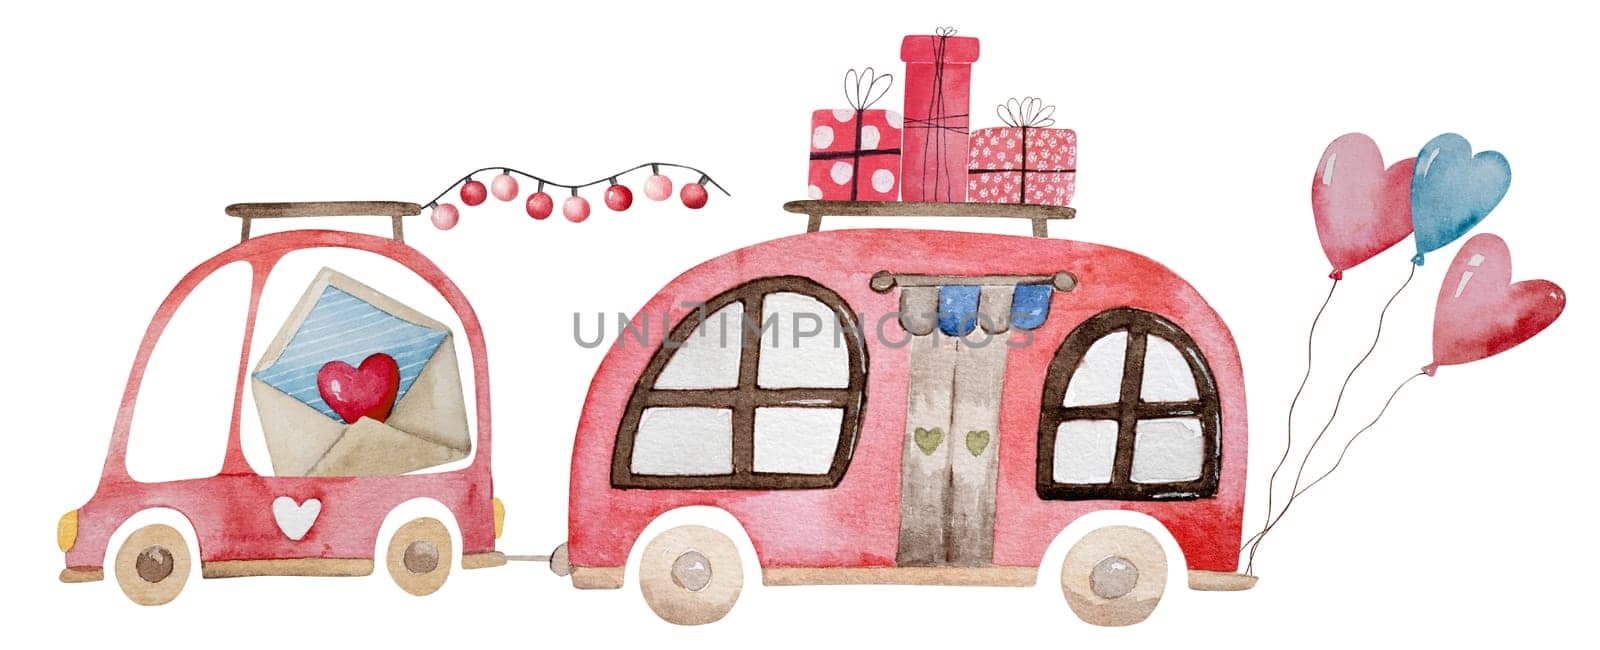 Hand-Drawn Watercolor Illustration Clipart Themed On February 14, Featuring A Car And A House On Wheels With Valentine'S Day Gifts